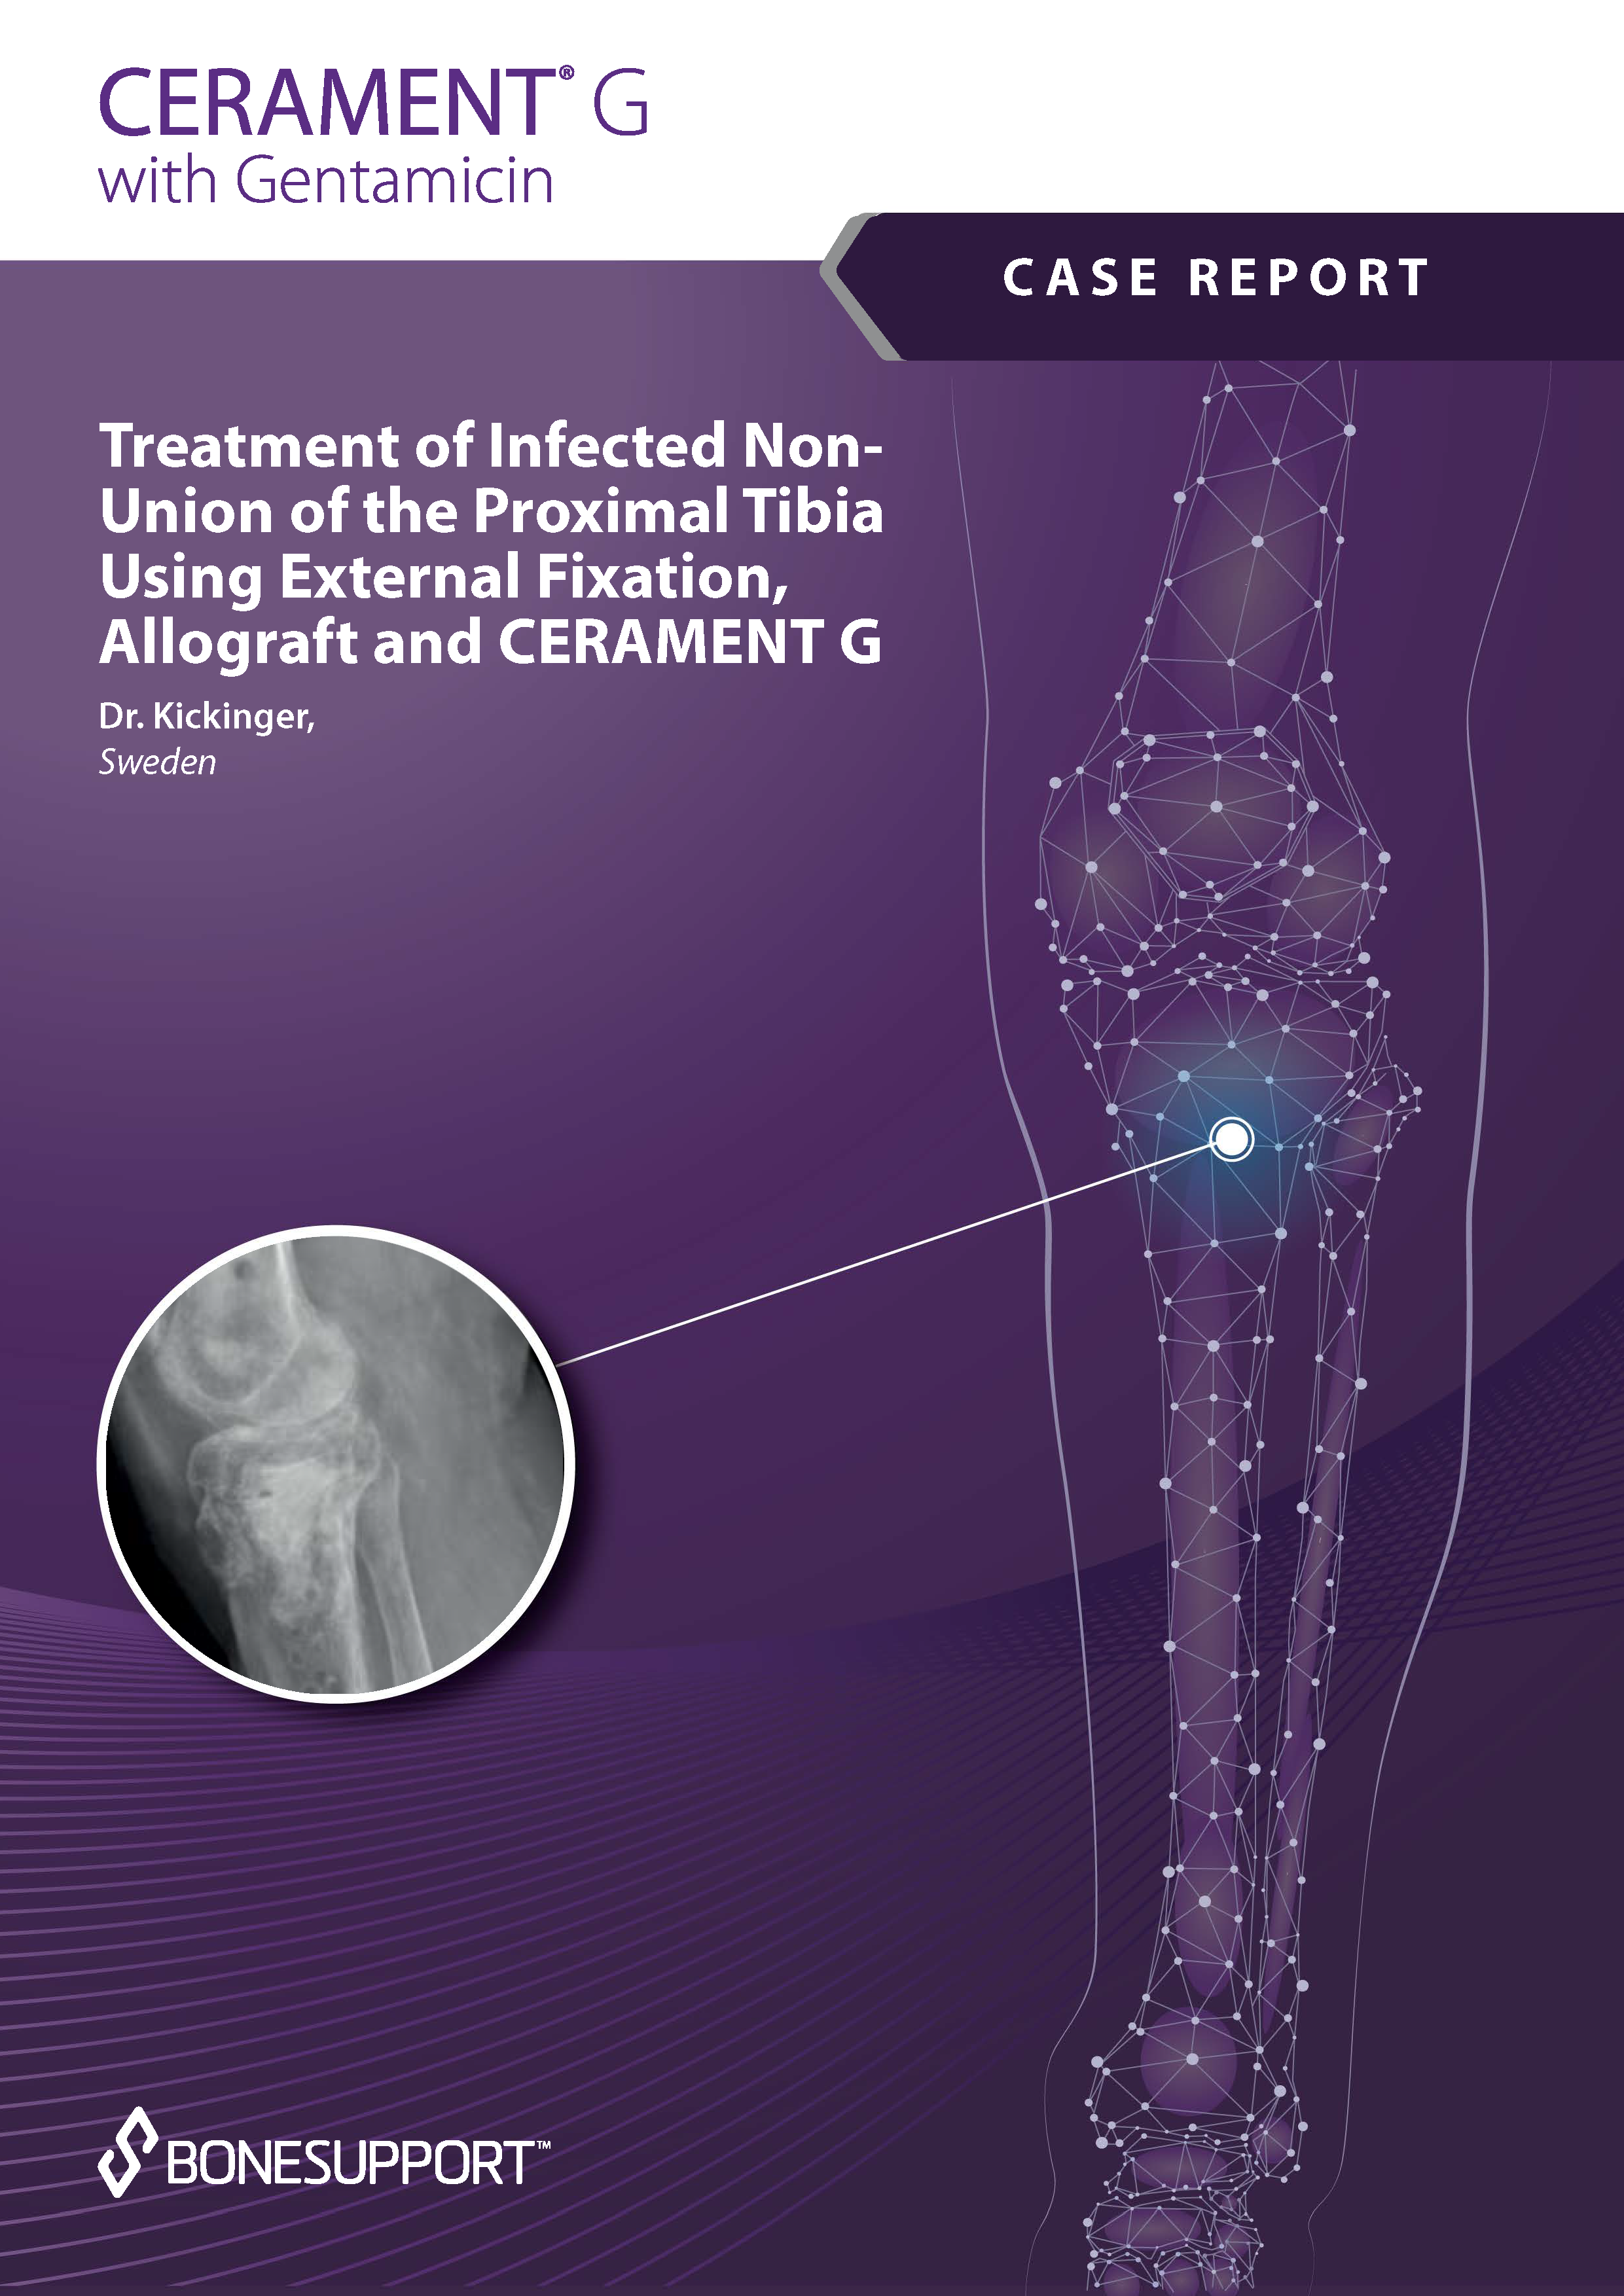 Treatment of infected non-union of the proximal tibia using external fixation, allograft and CERAMENT ®|G